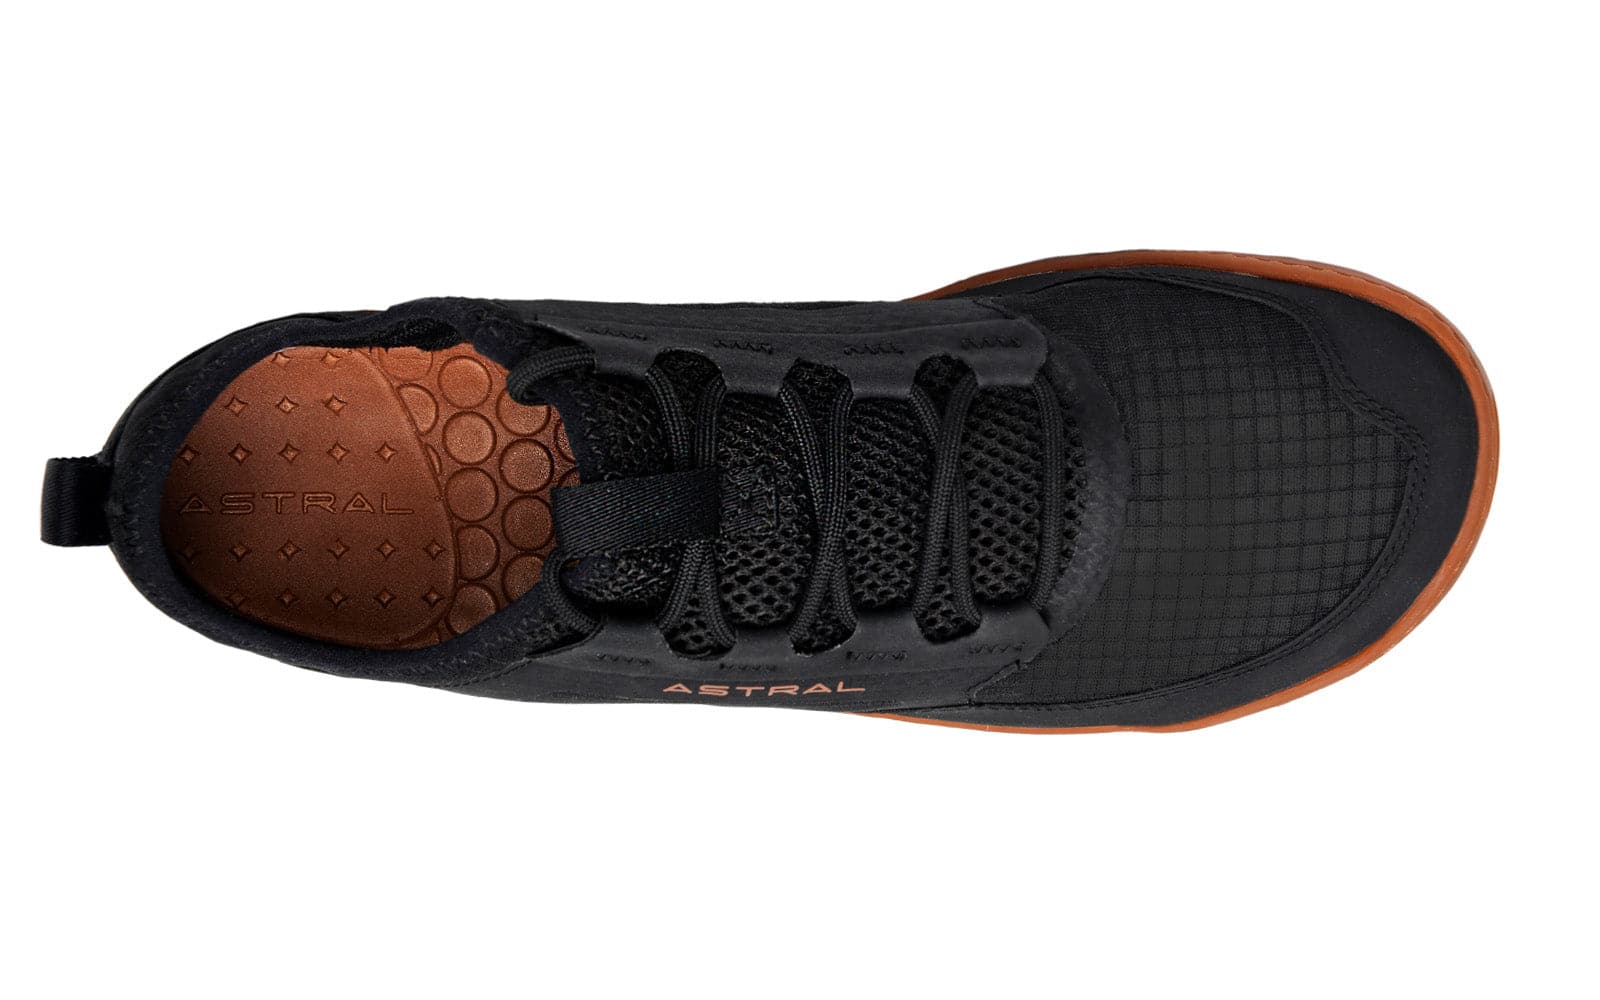 Featuring the Loyak AC - Men's men's footwear manufactured by Astral shown here from a sixth angle.